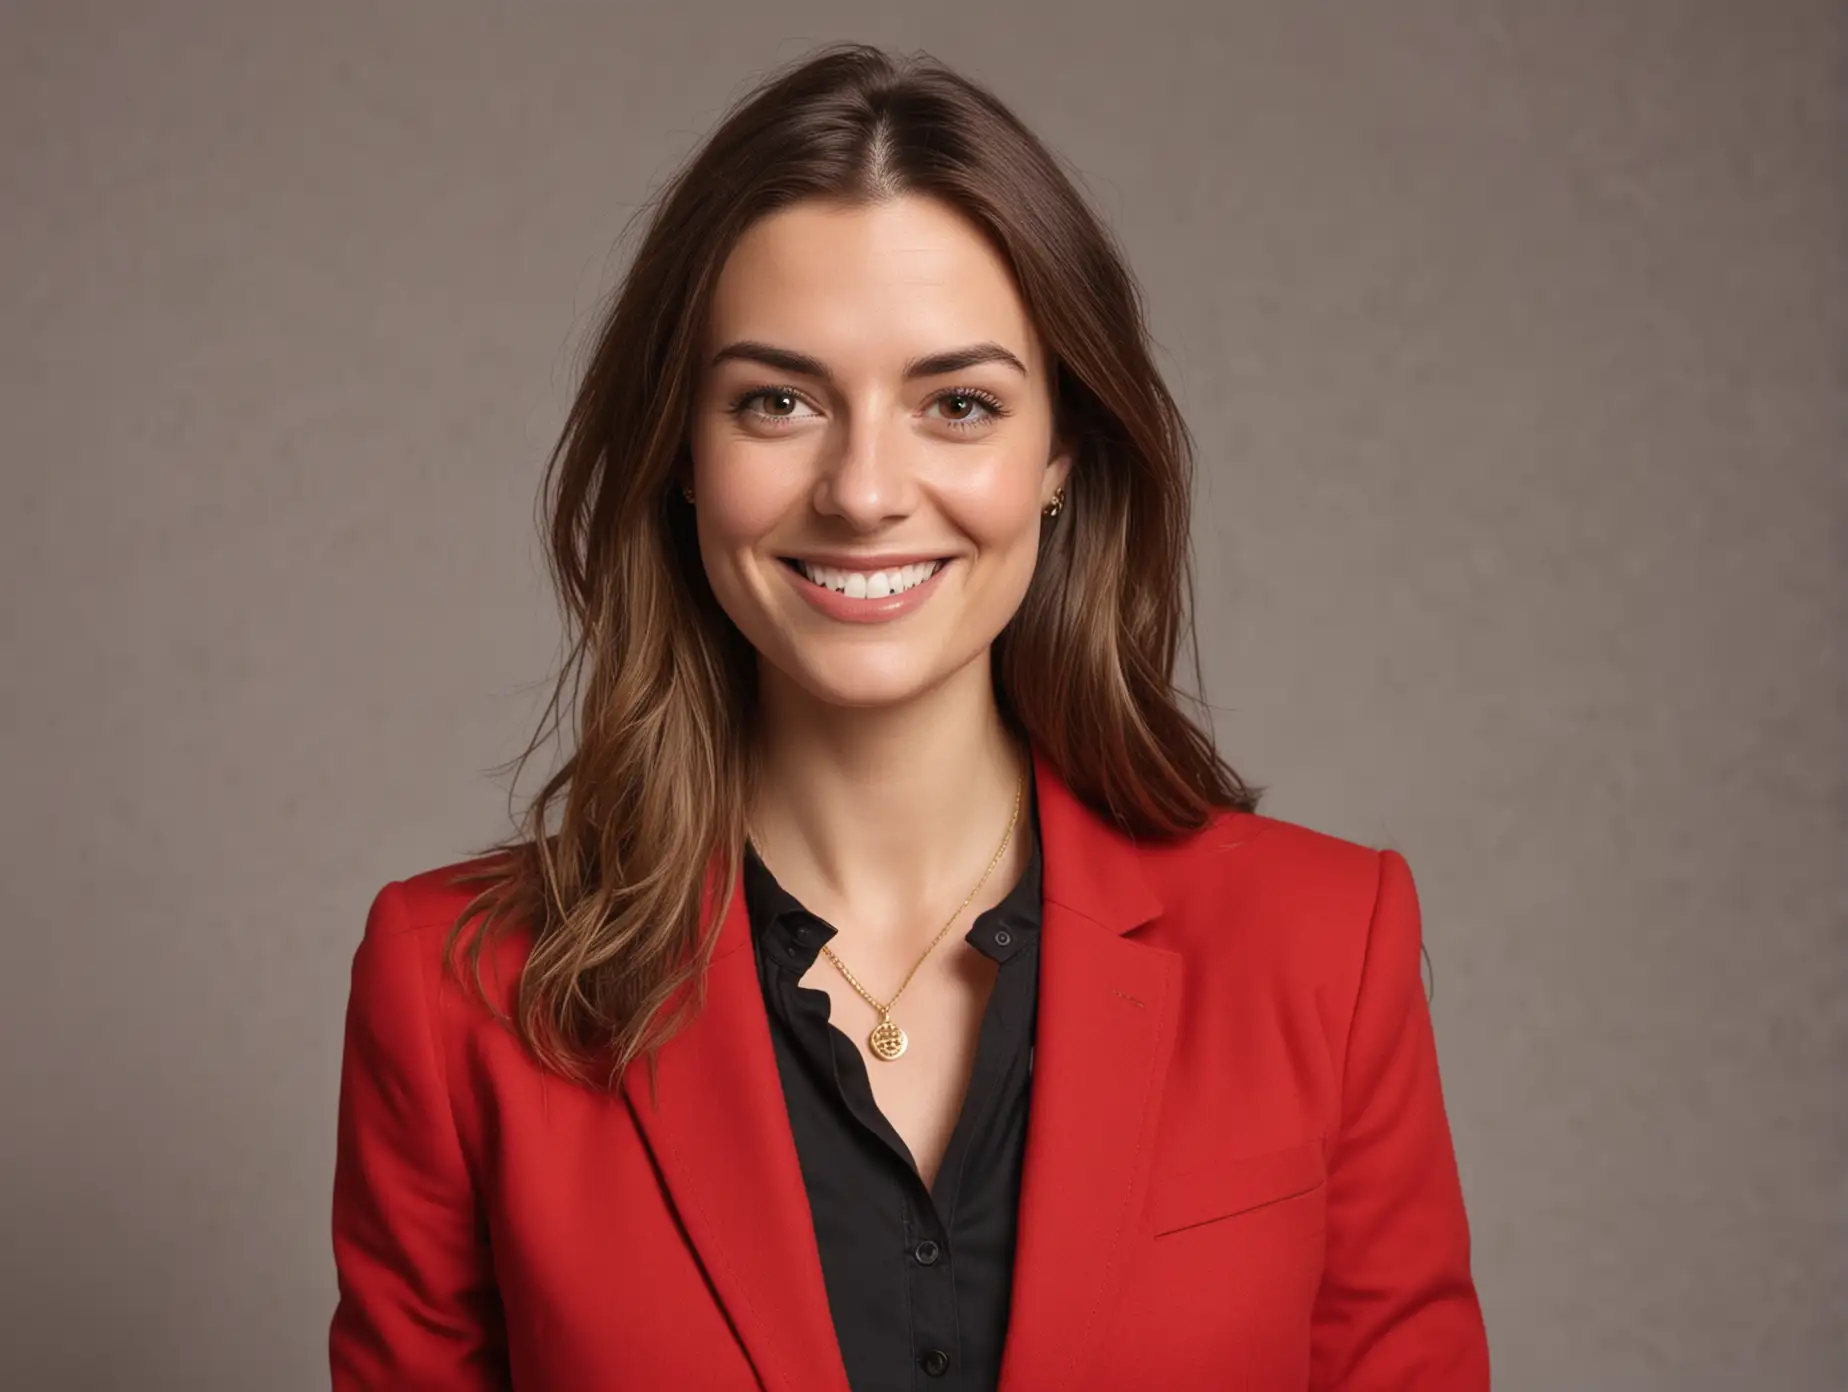 30 year old white woman with long  brown hair, wearing a buttoned up red blazer, simple gold necklace, plain black shirt and black dress pants. She is smiling at camera with eyebrows raised. She might be of British, Irish or Danish descent.